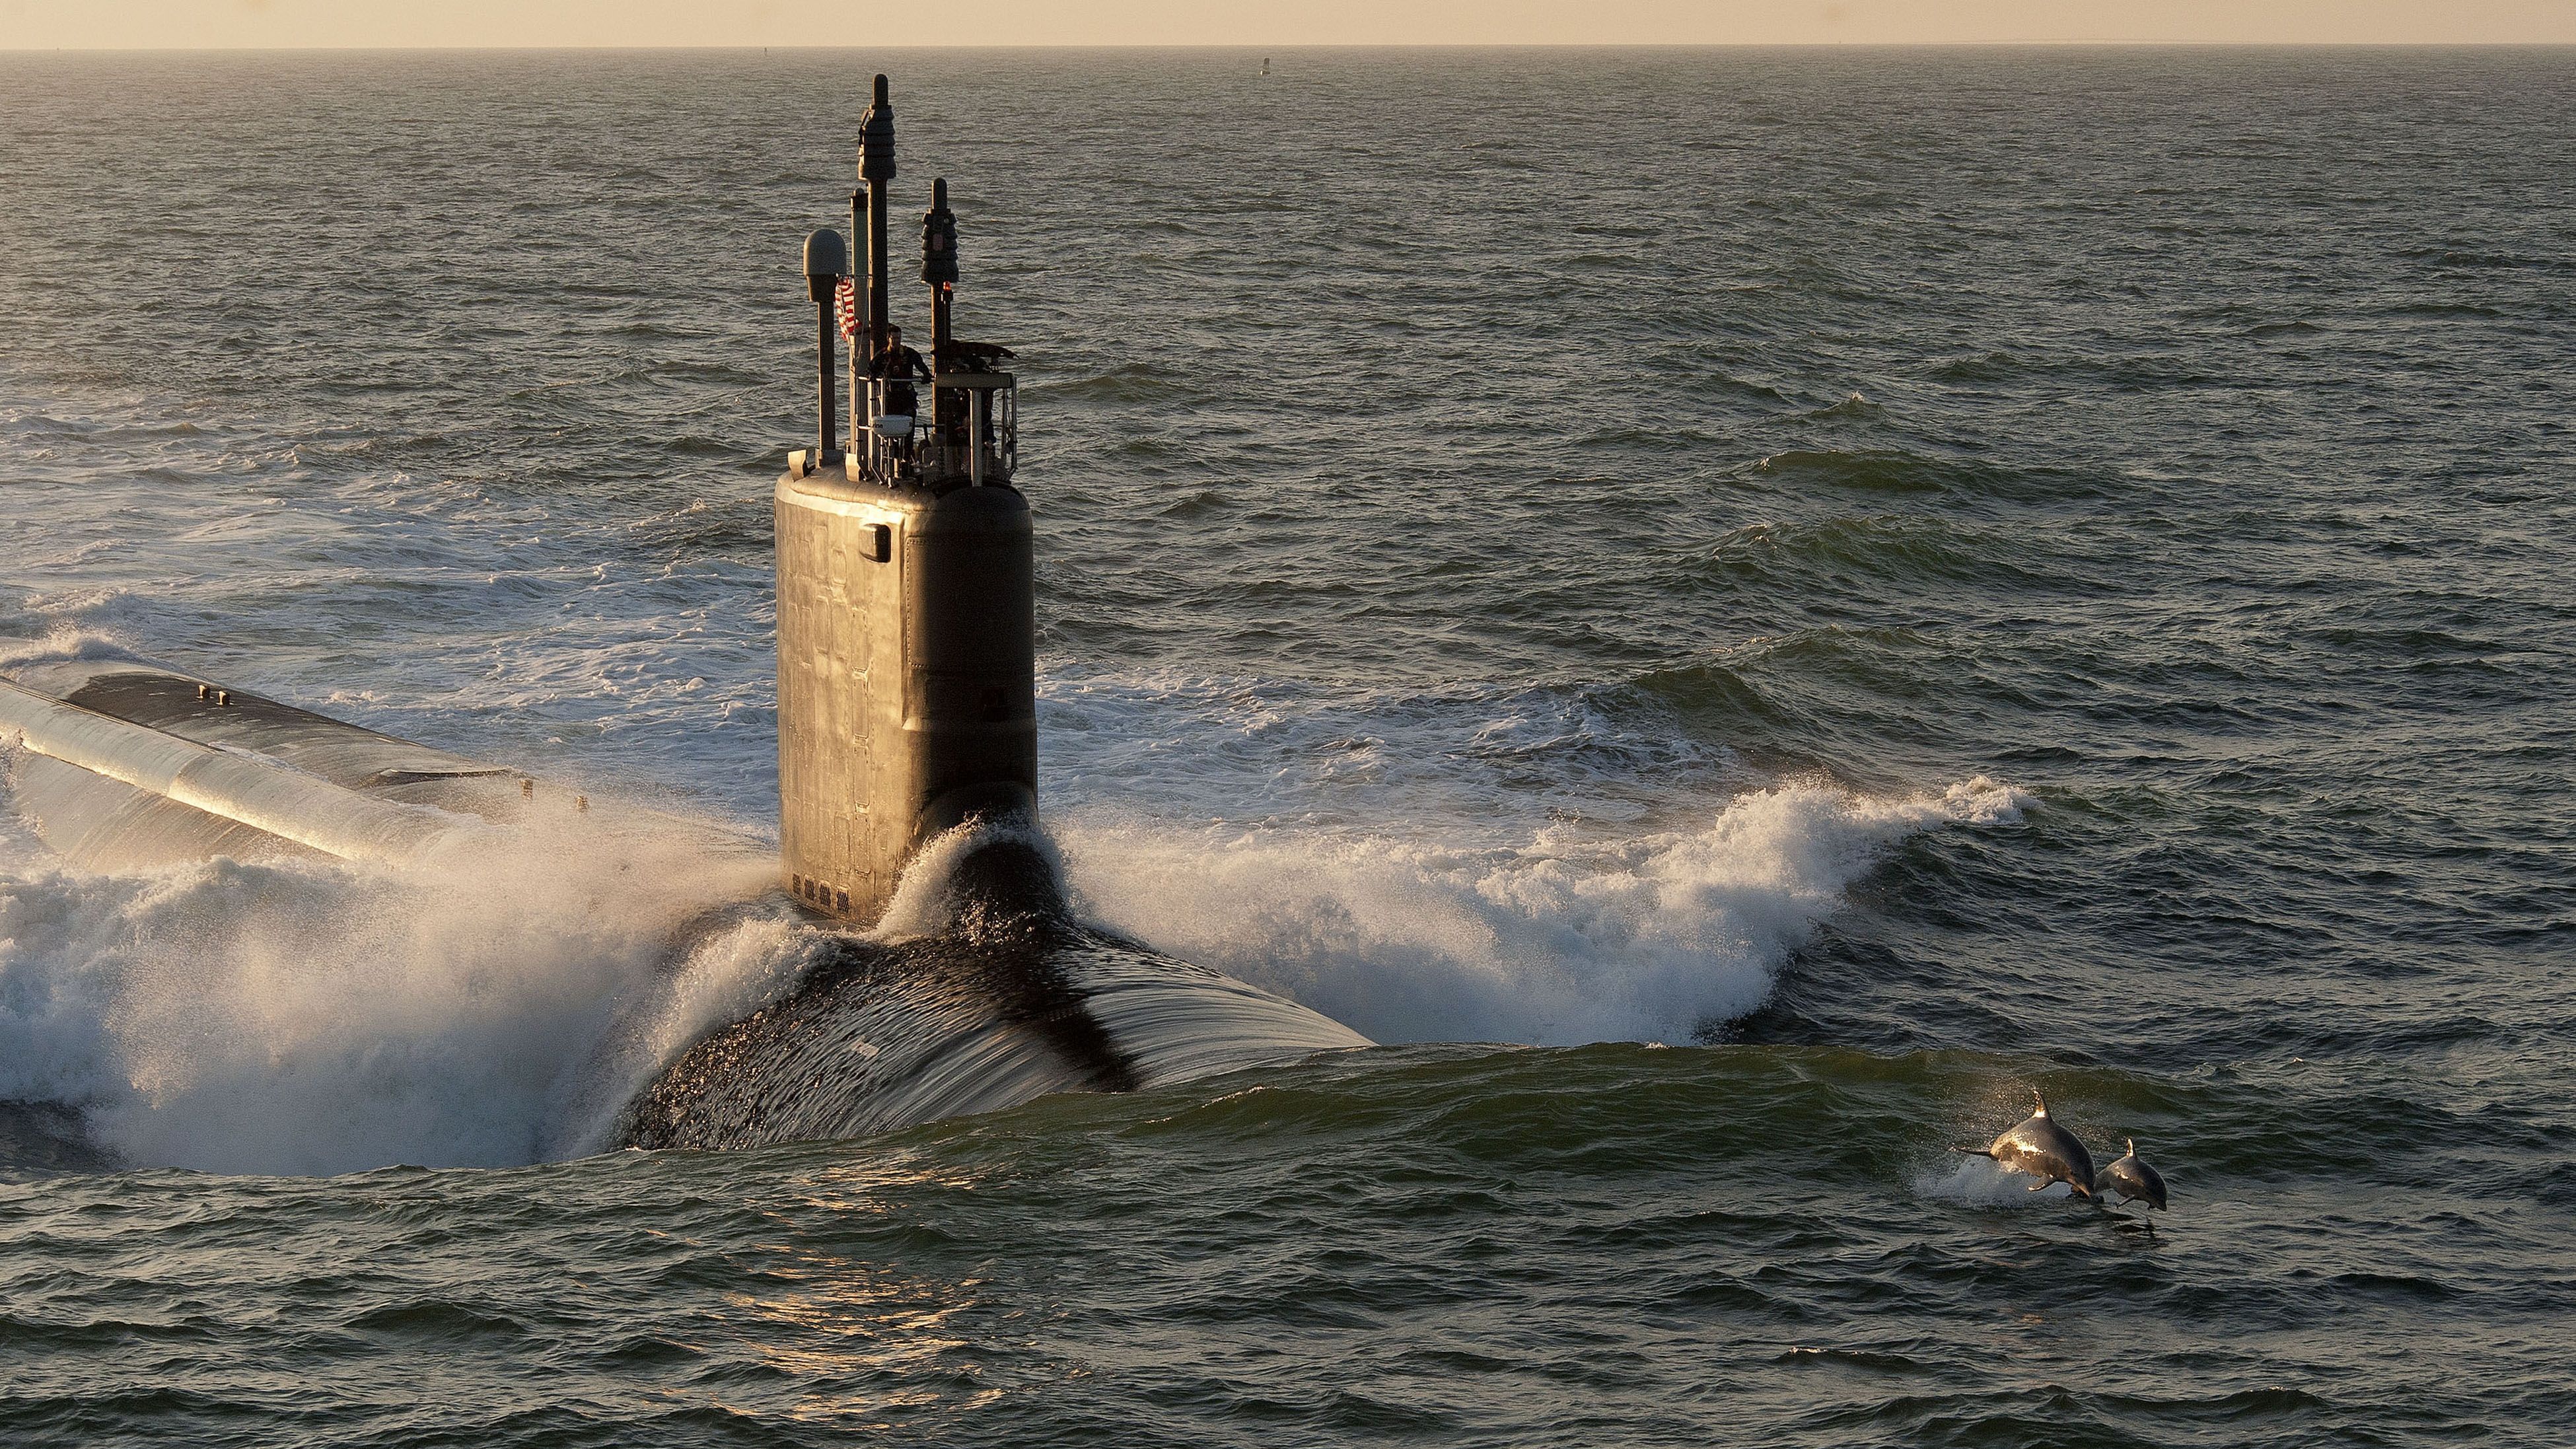 Submarine 4K wallpaper for your desktop or mobile screen free and easy to download